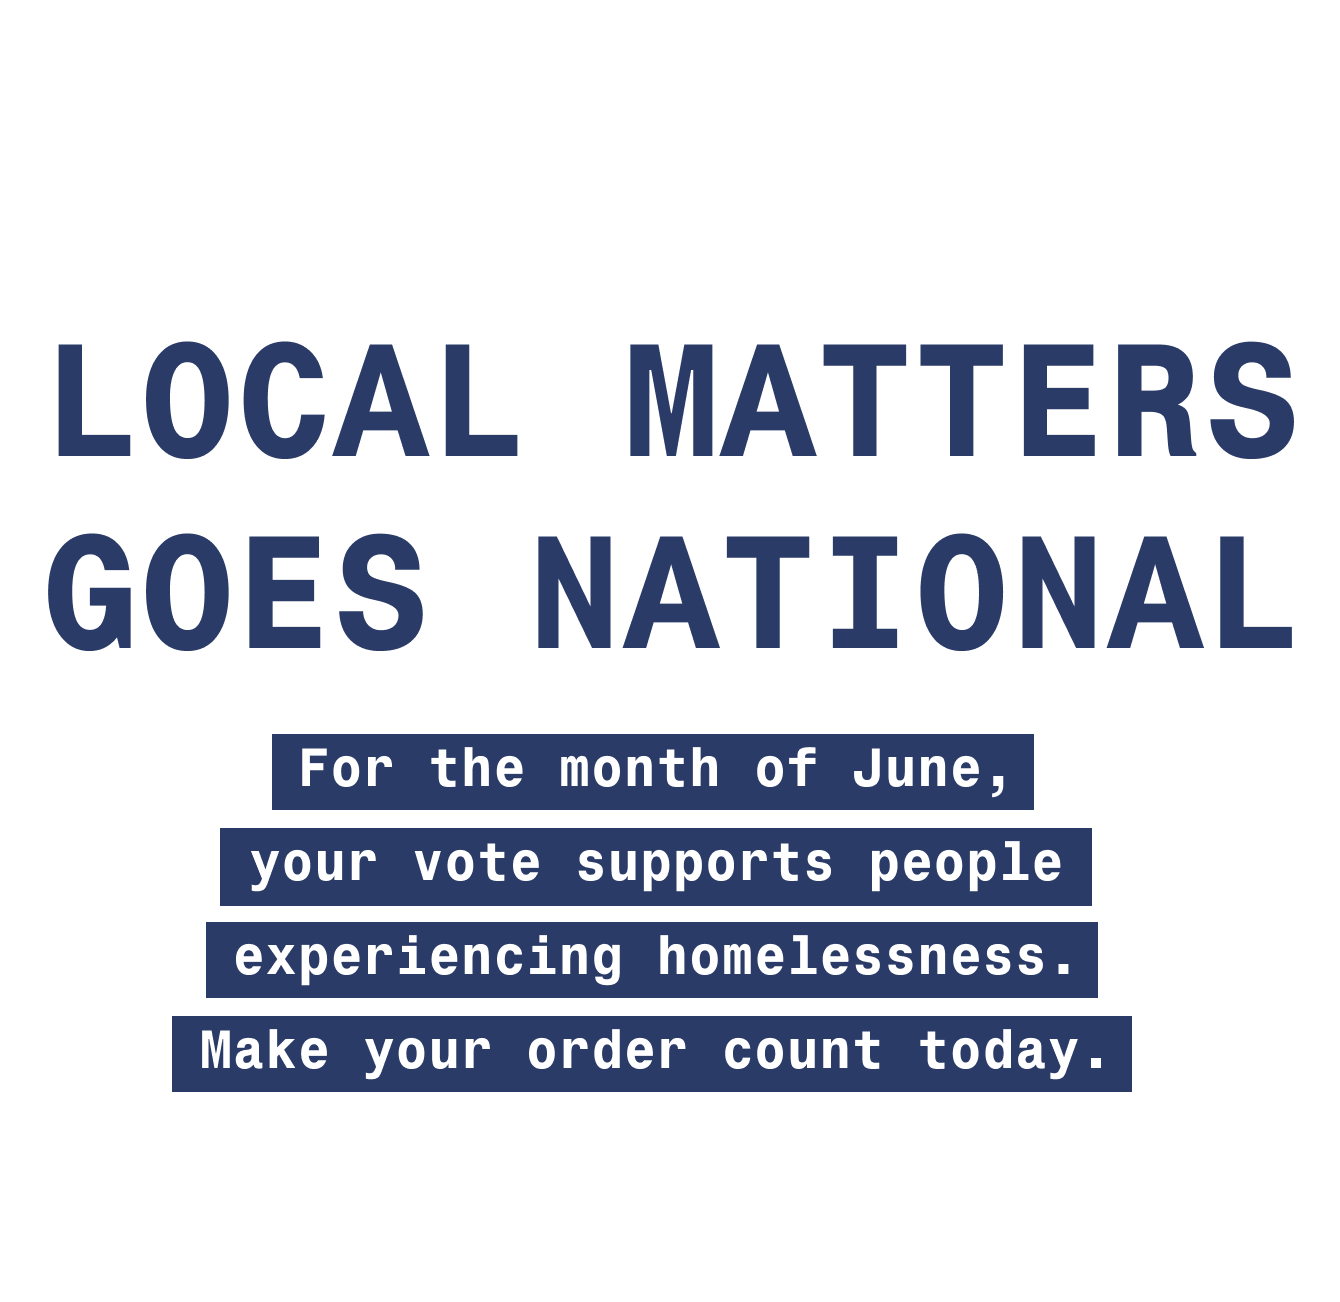 Local Matters goes national. For the month of June, your vote supports people experiencing homelessness.